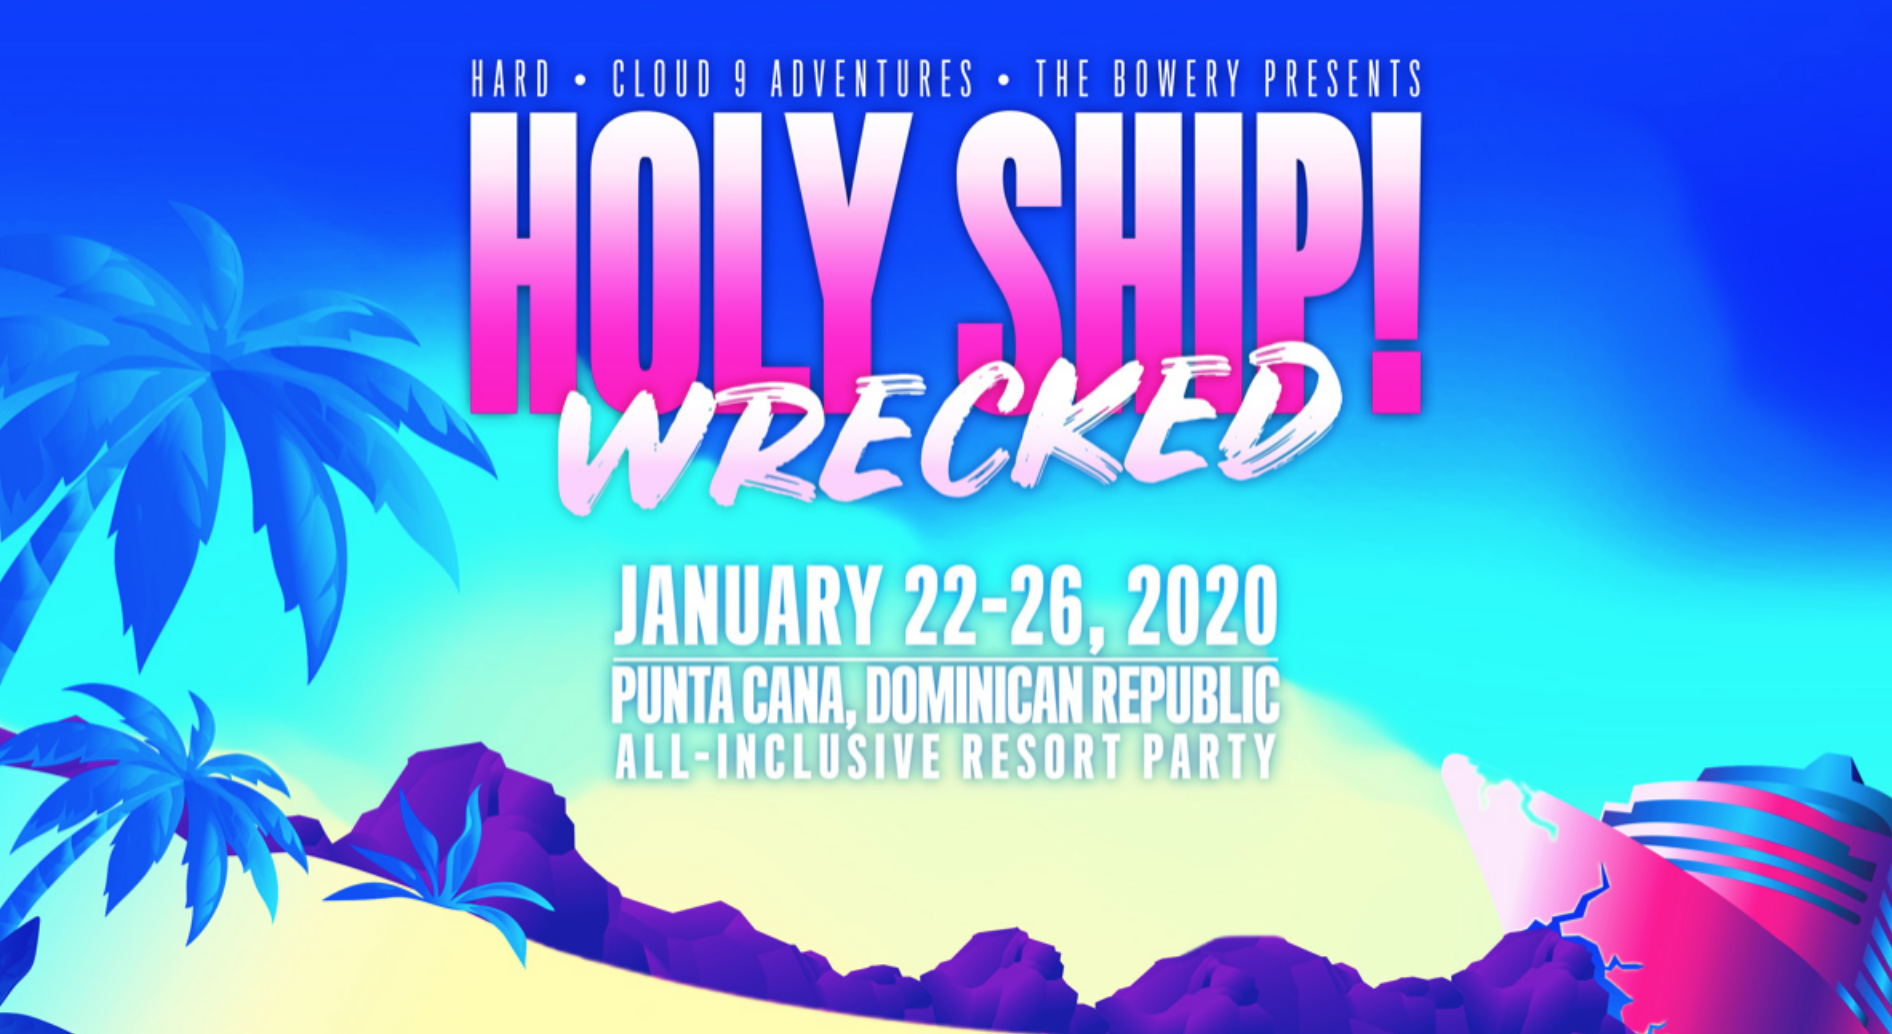 Holy Ship! Wrecked 2020